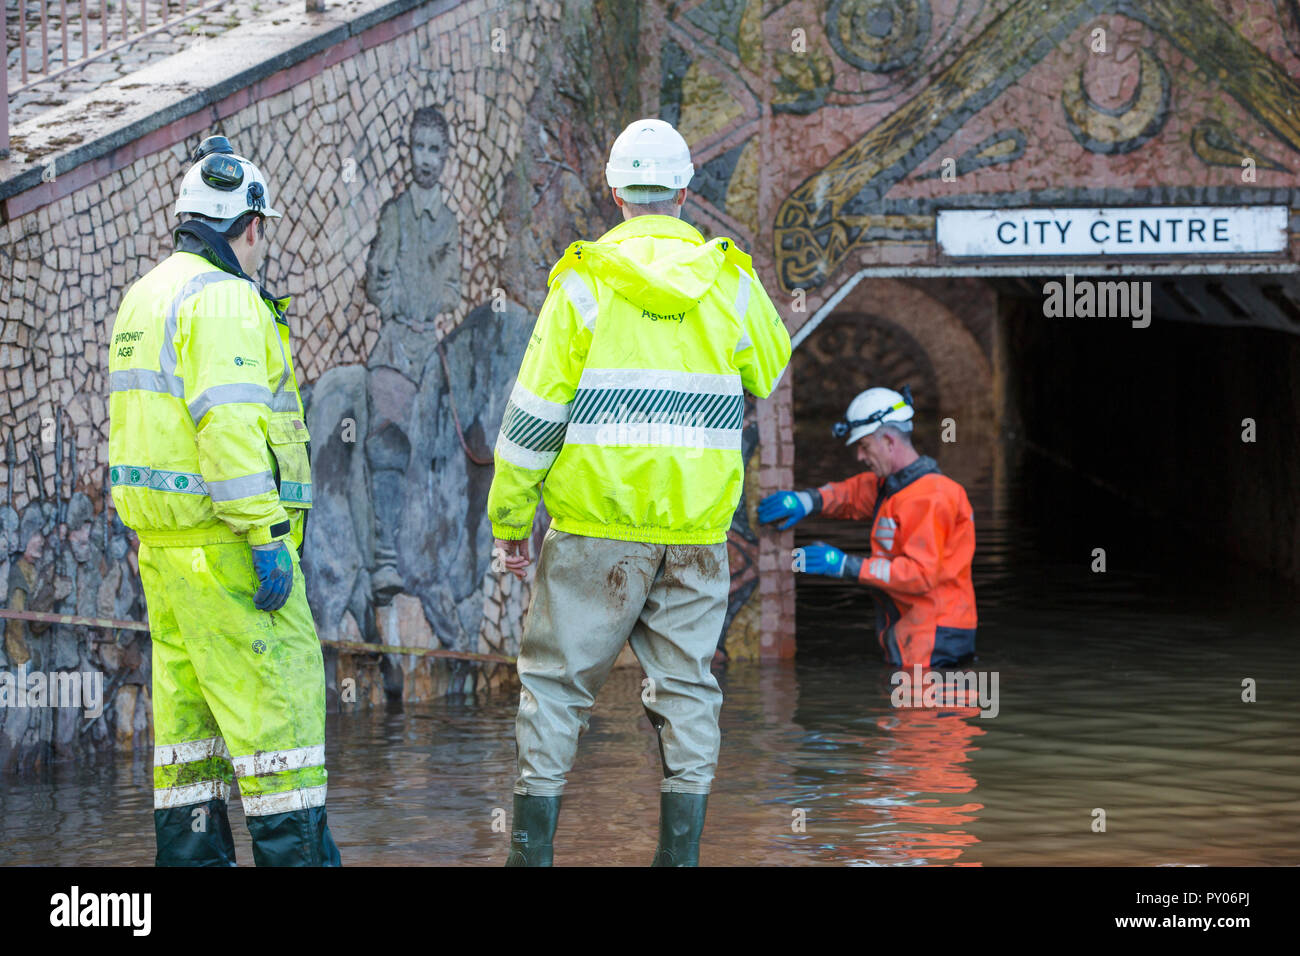 Environment Agency staff involved in pumping out floodwater from Hardwicke Circus in Carlisle, Cumbria on Tuesday 8th December 2015, after torrential rain from storm Desmond. The storm set a new British record for rainfsll totals in a day with 341.4mm falling in 24 hours. Stock Photo